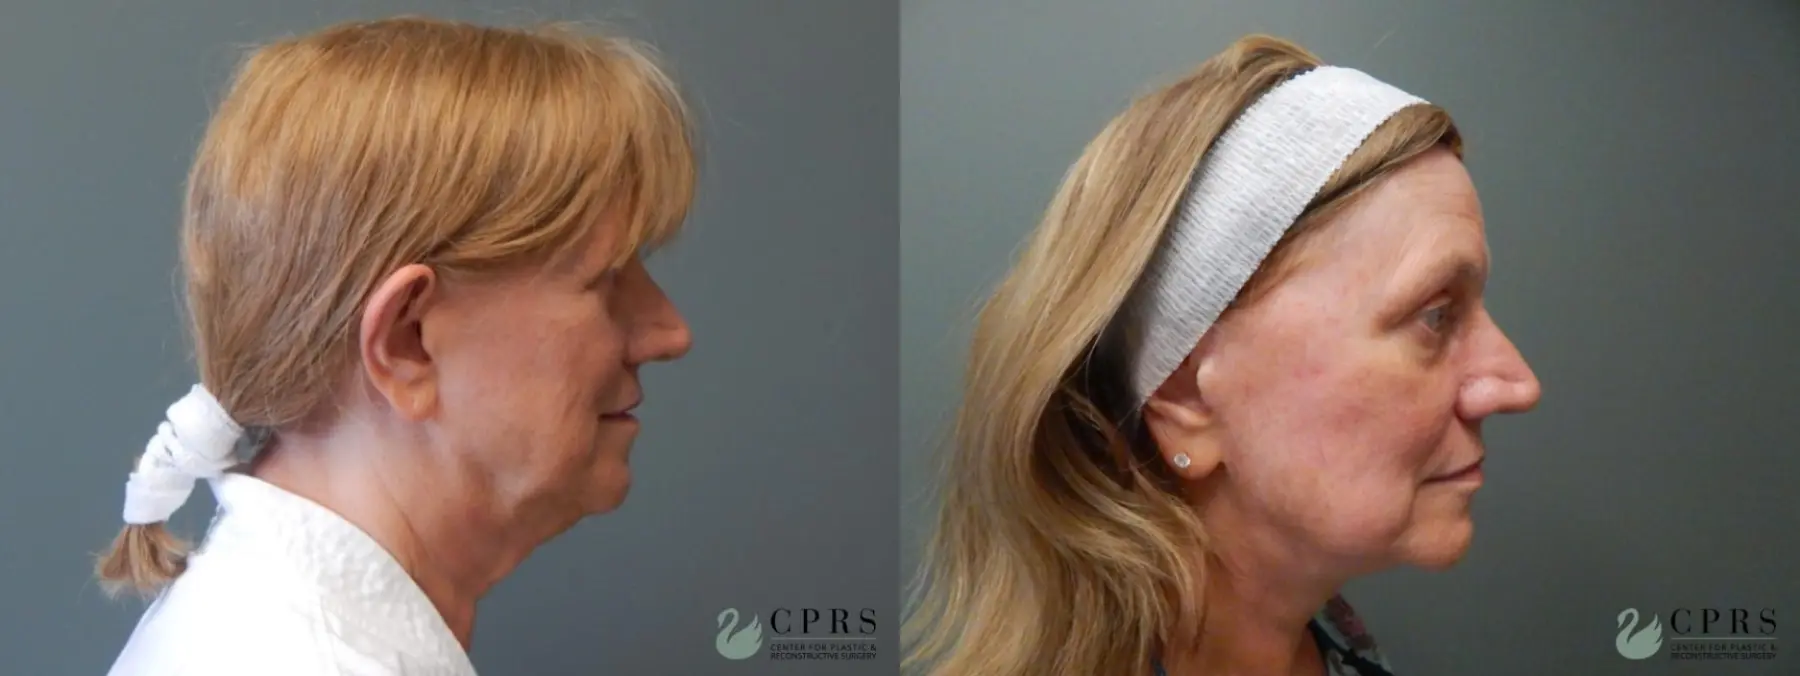 Facelift & Neck Lift: Patient 3 - Before and After  